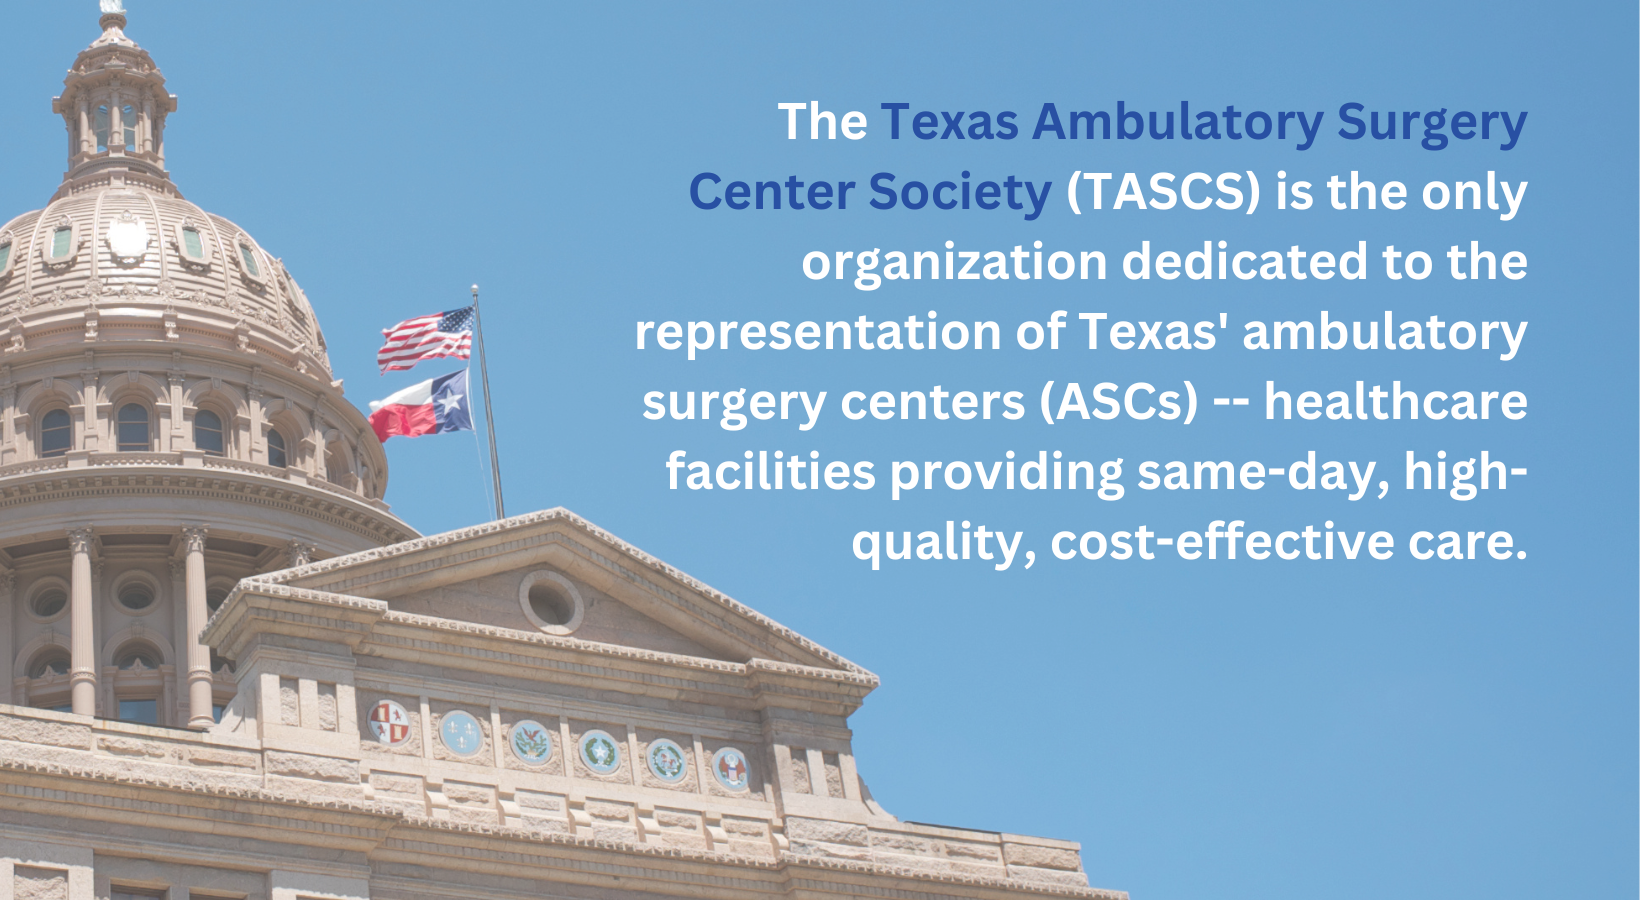 The Texas Ambulatory Surgery Center Society and the texas capitol building